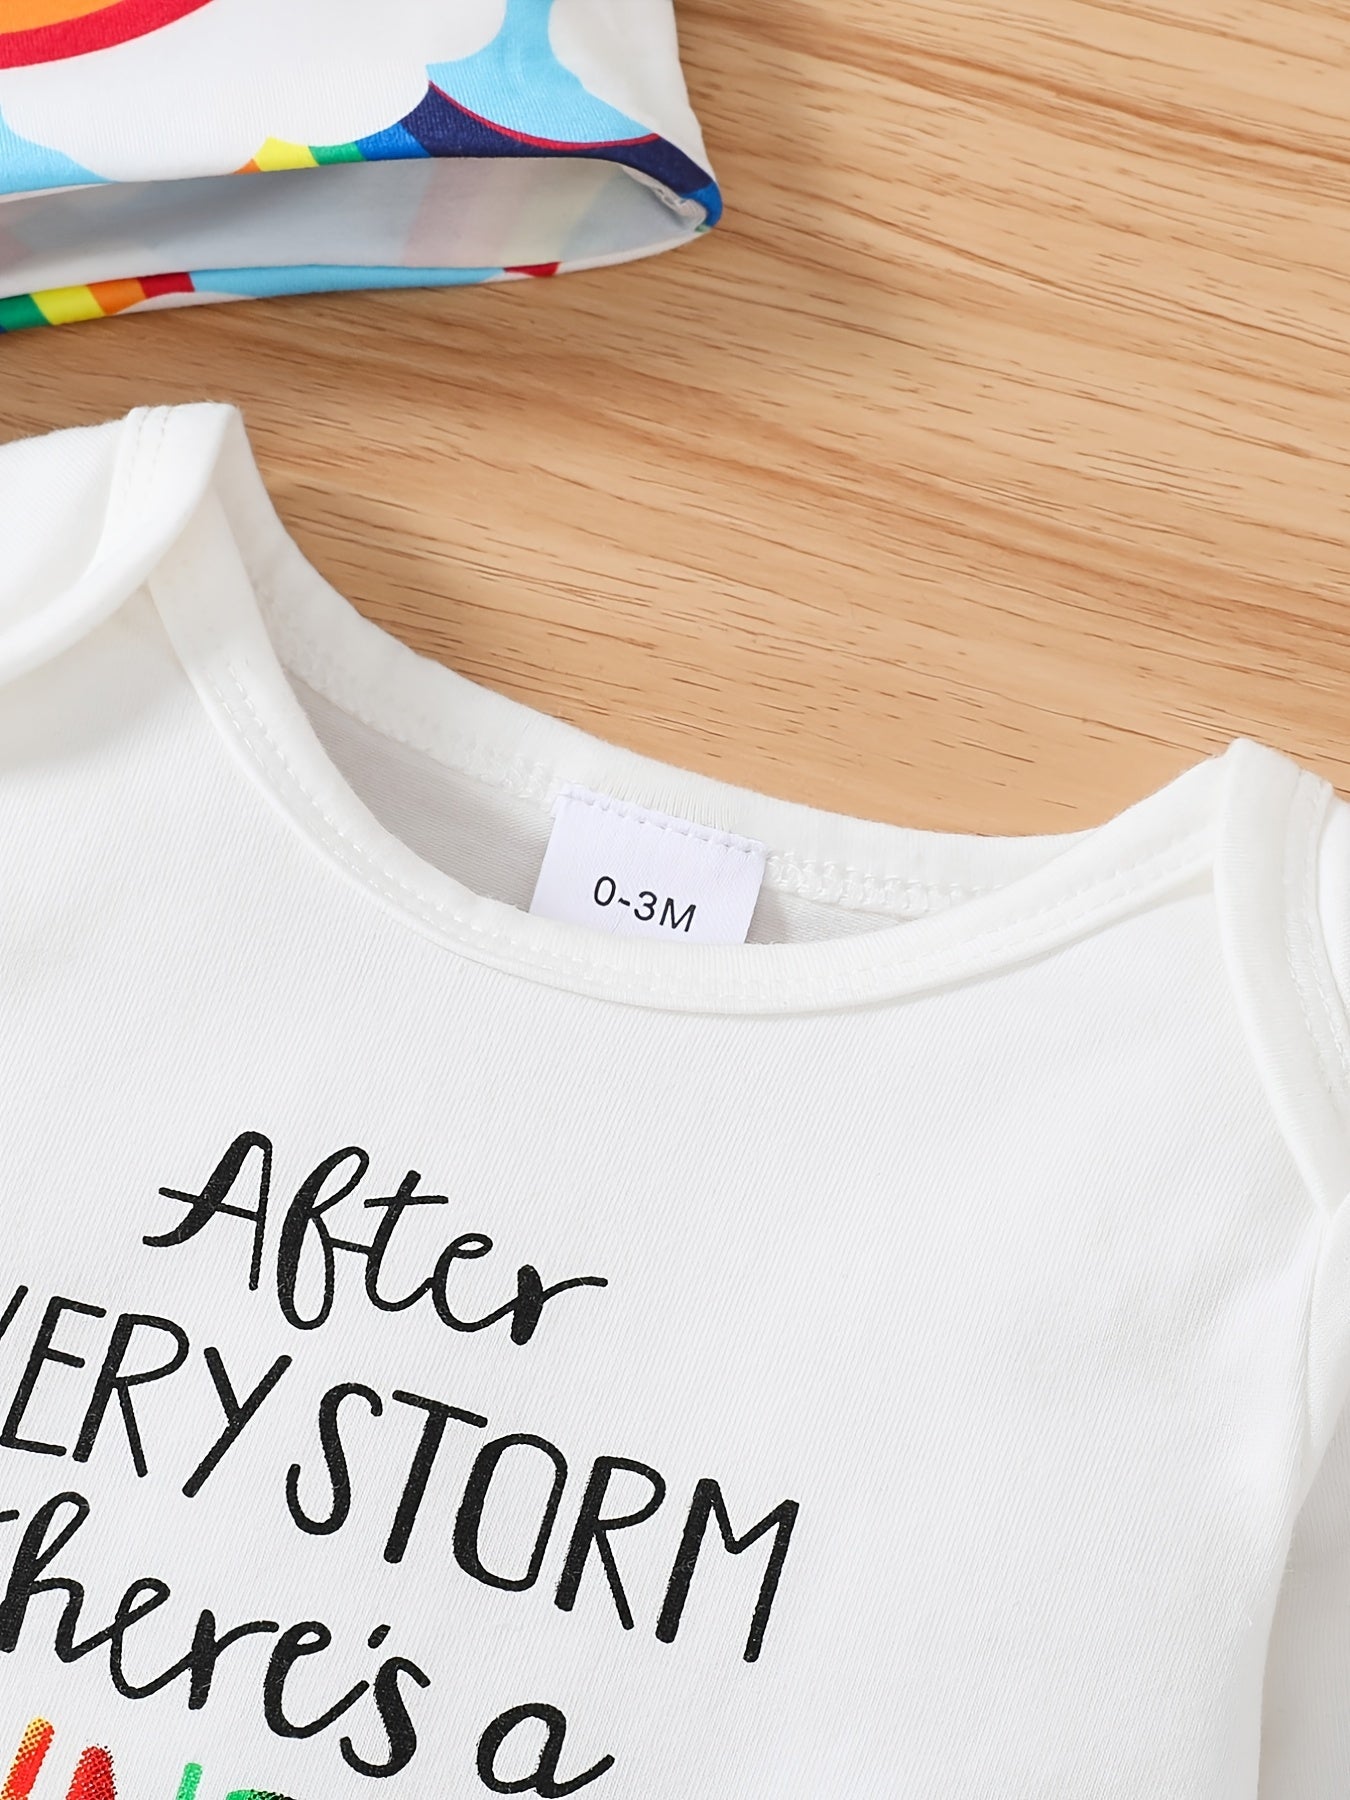 After Every Storm There Is A Rainbow Of Hope Here I Am Christian Toddler Casual Outfit claimedbygoddesigns